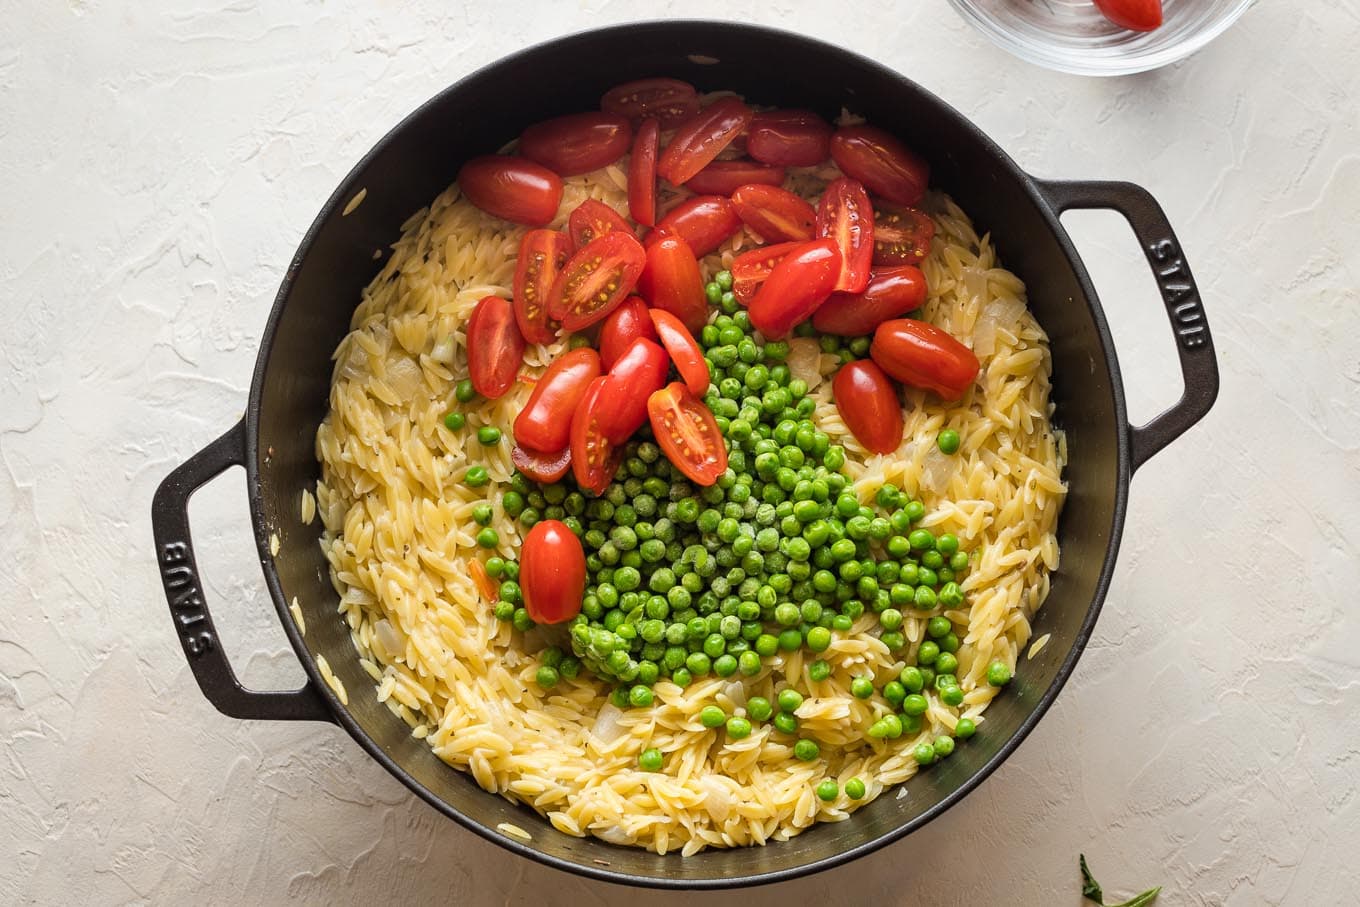 Cherry tomatoes and frozen peas added to cooked orzo.